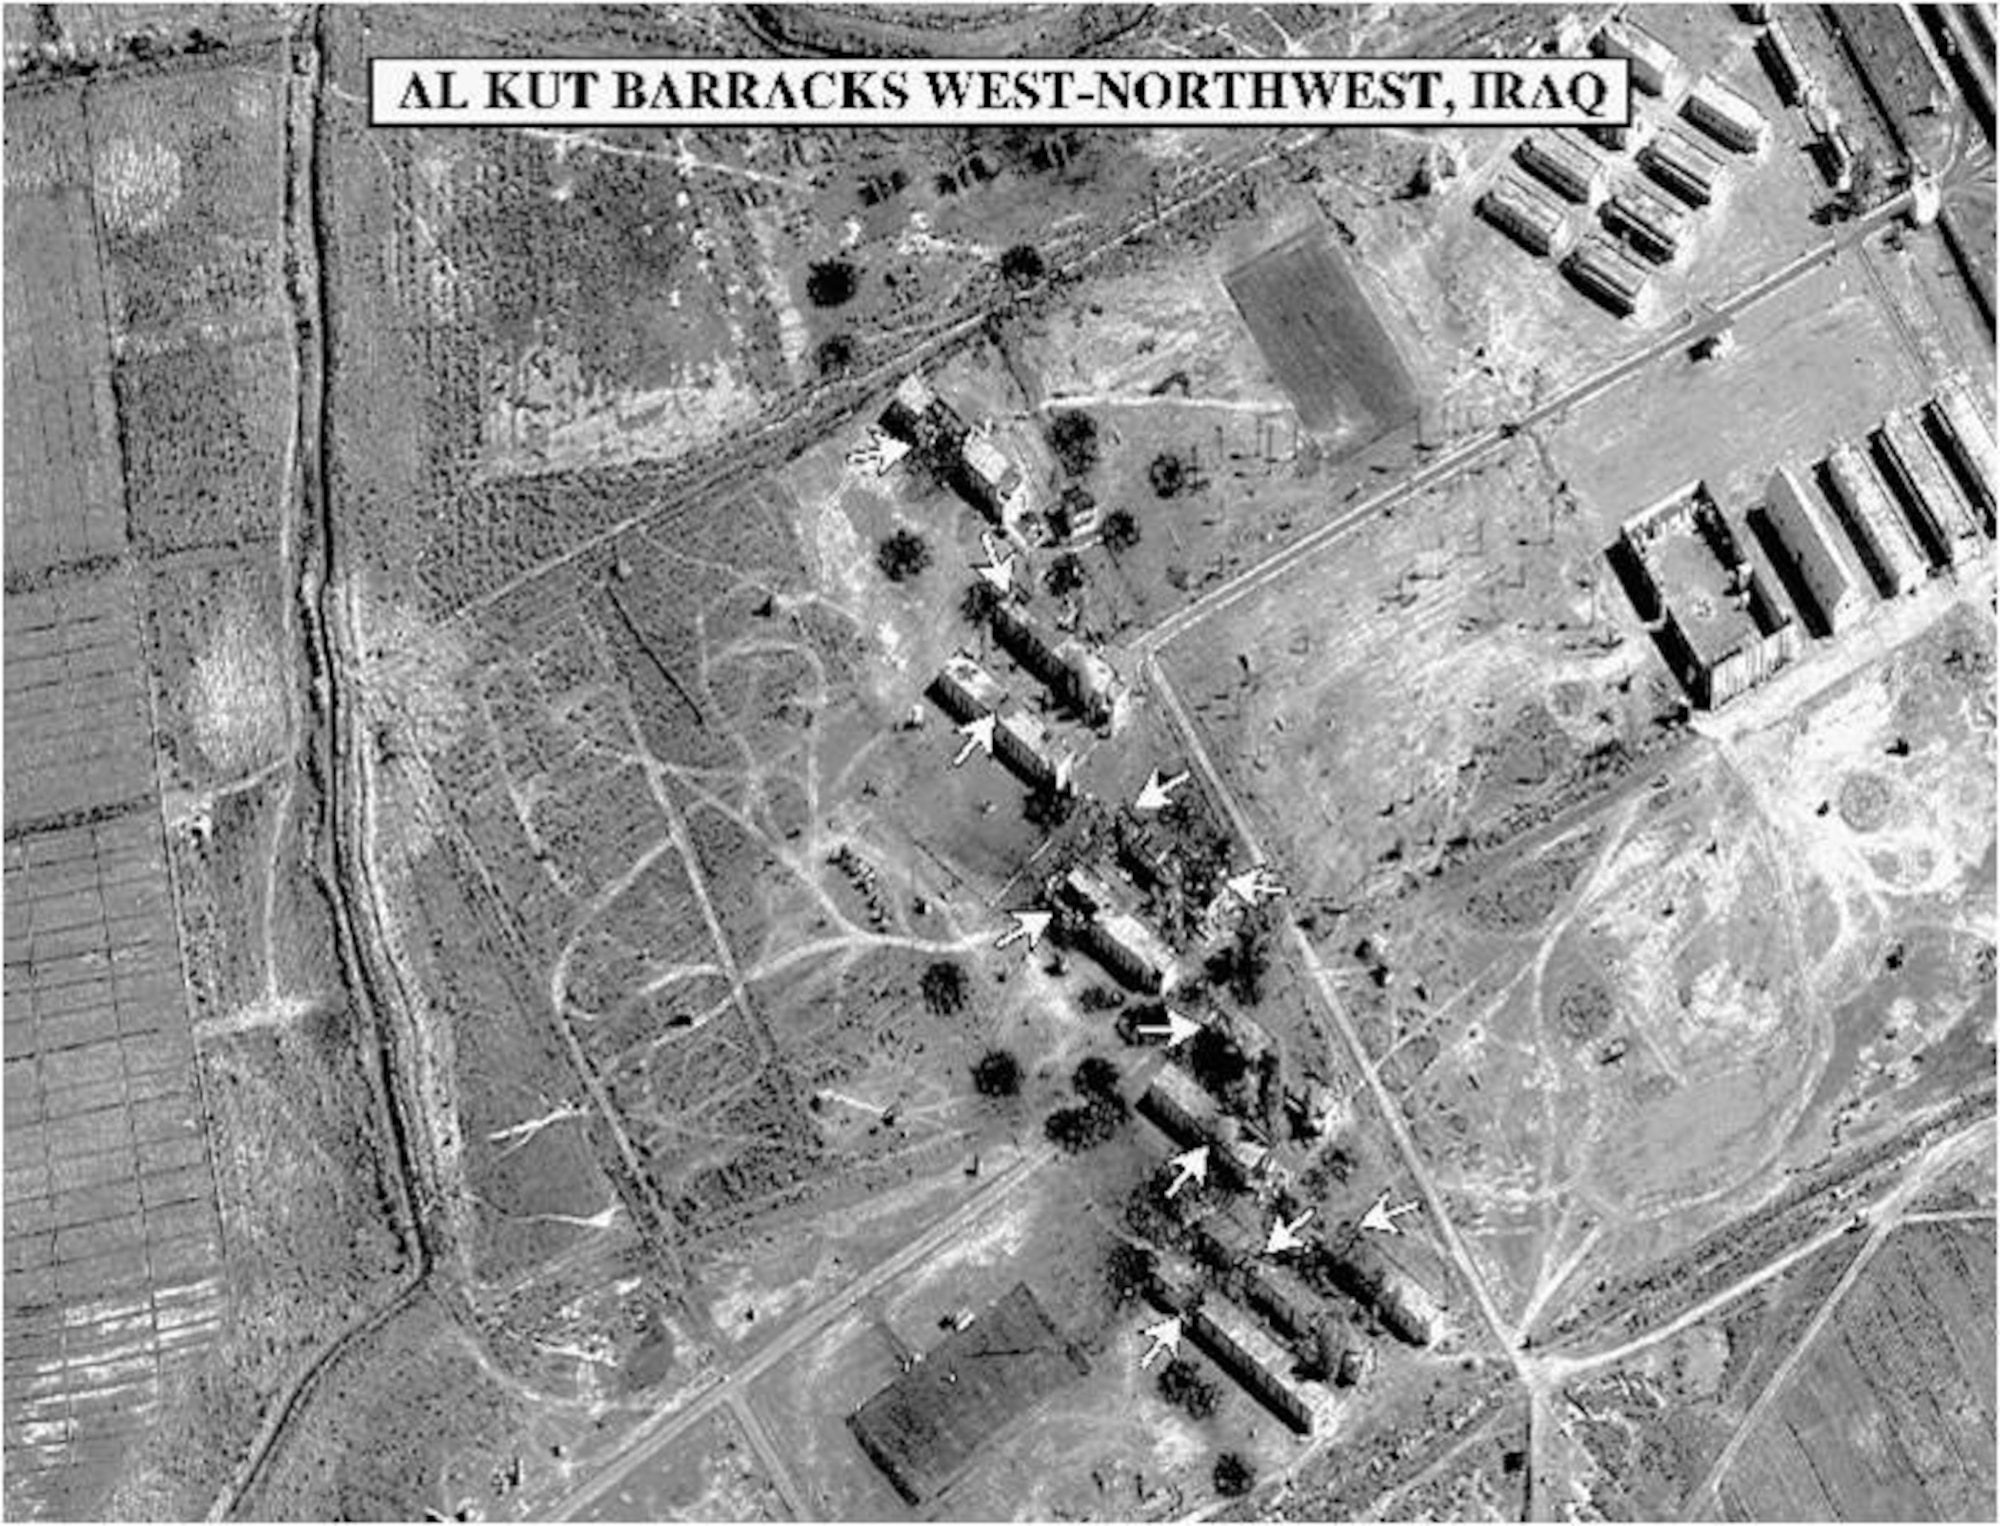 Battle damage assessment of the Al Kut Republican Guard barracks in western Iraq after the first B-1 bomber dropped munitions on it during Operation Desert Fox, December 1998. The four-night military offensive caused significant destruction to Iraqi military infrastructure. (U.S. Air Force courtesy photo/Released)